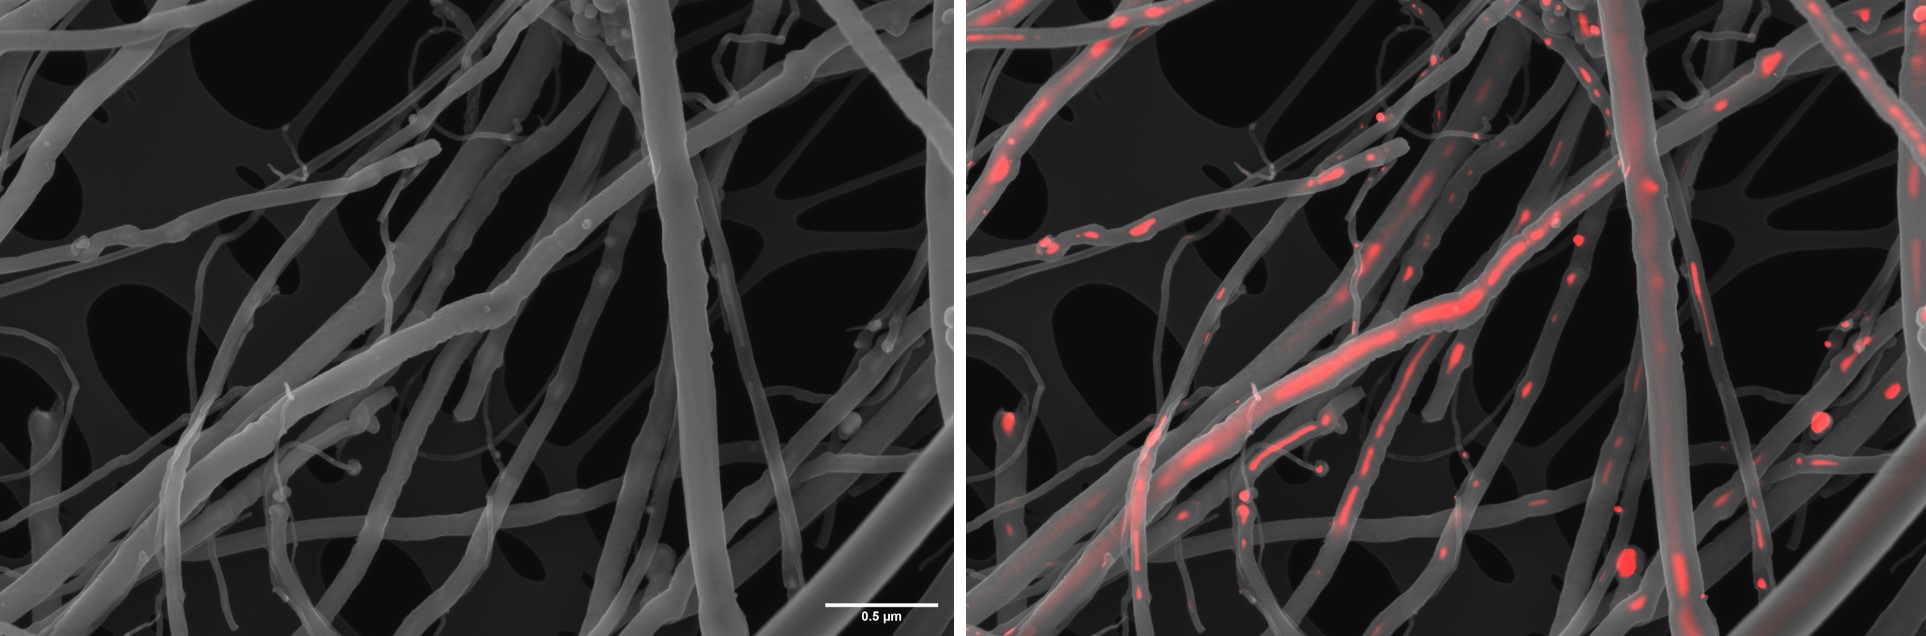 Carbon nanotubes imaged in SE-mode (left) showing their smooth surface topography. The image on the right is an overlay of this SE-image with the BSc image (red) revealing areas of high Z inside the CNTs. EDX showed this to be the iron catalyst used durin